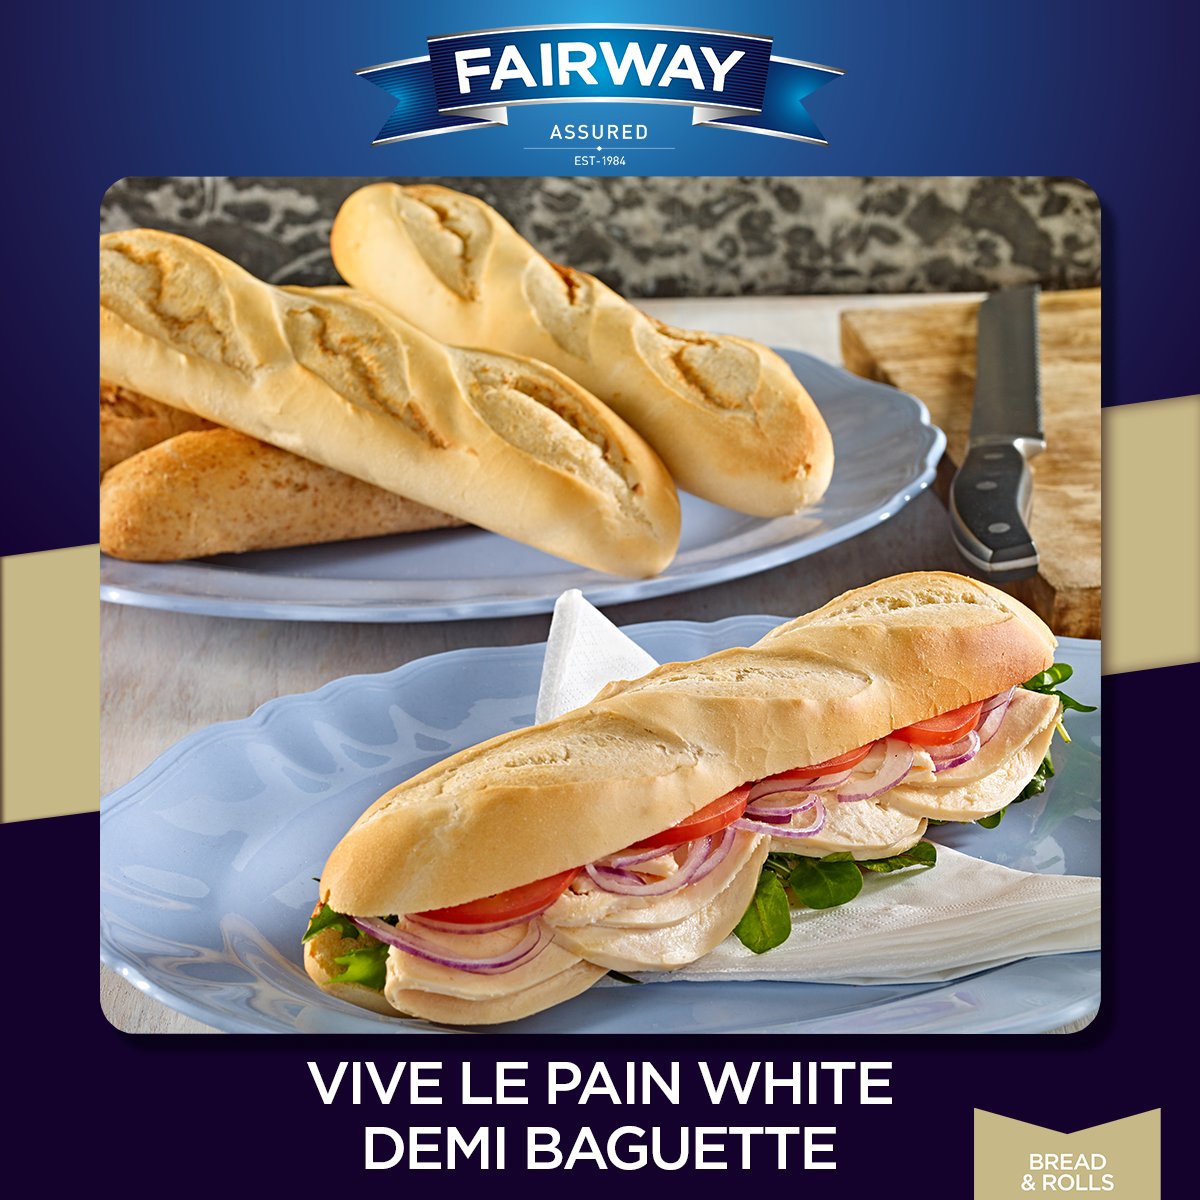 Whether it's a classic BLT or a gourmet chicken avocado, our authentic French demi baguette adds that perfect crunch and softness to your sandwich creations. 

Where to buy 👉 ow.ly/lf0M50RoOiG

📅 #BritishSandwichWeek 19-25th May

#Foodservice #Hospitality #Catering